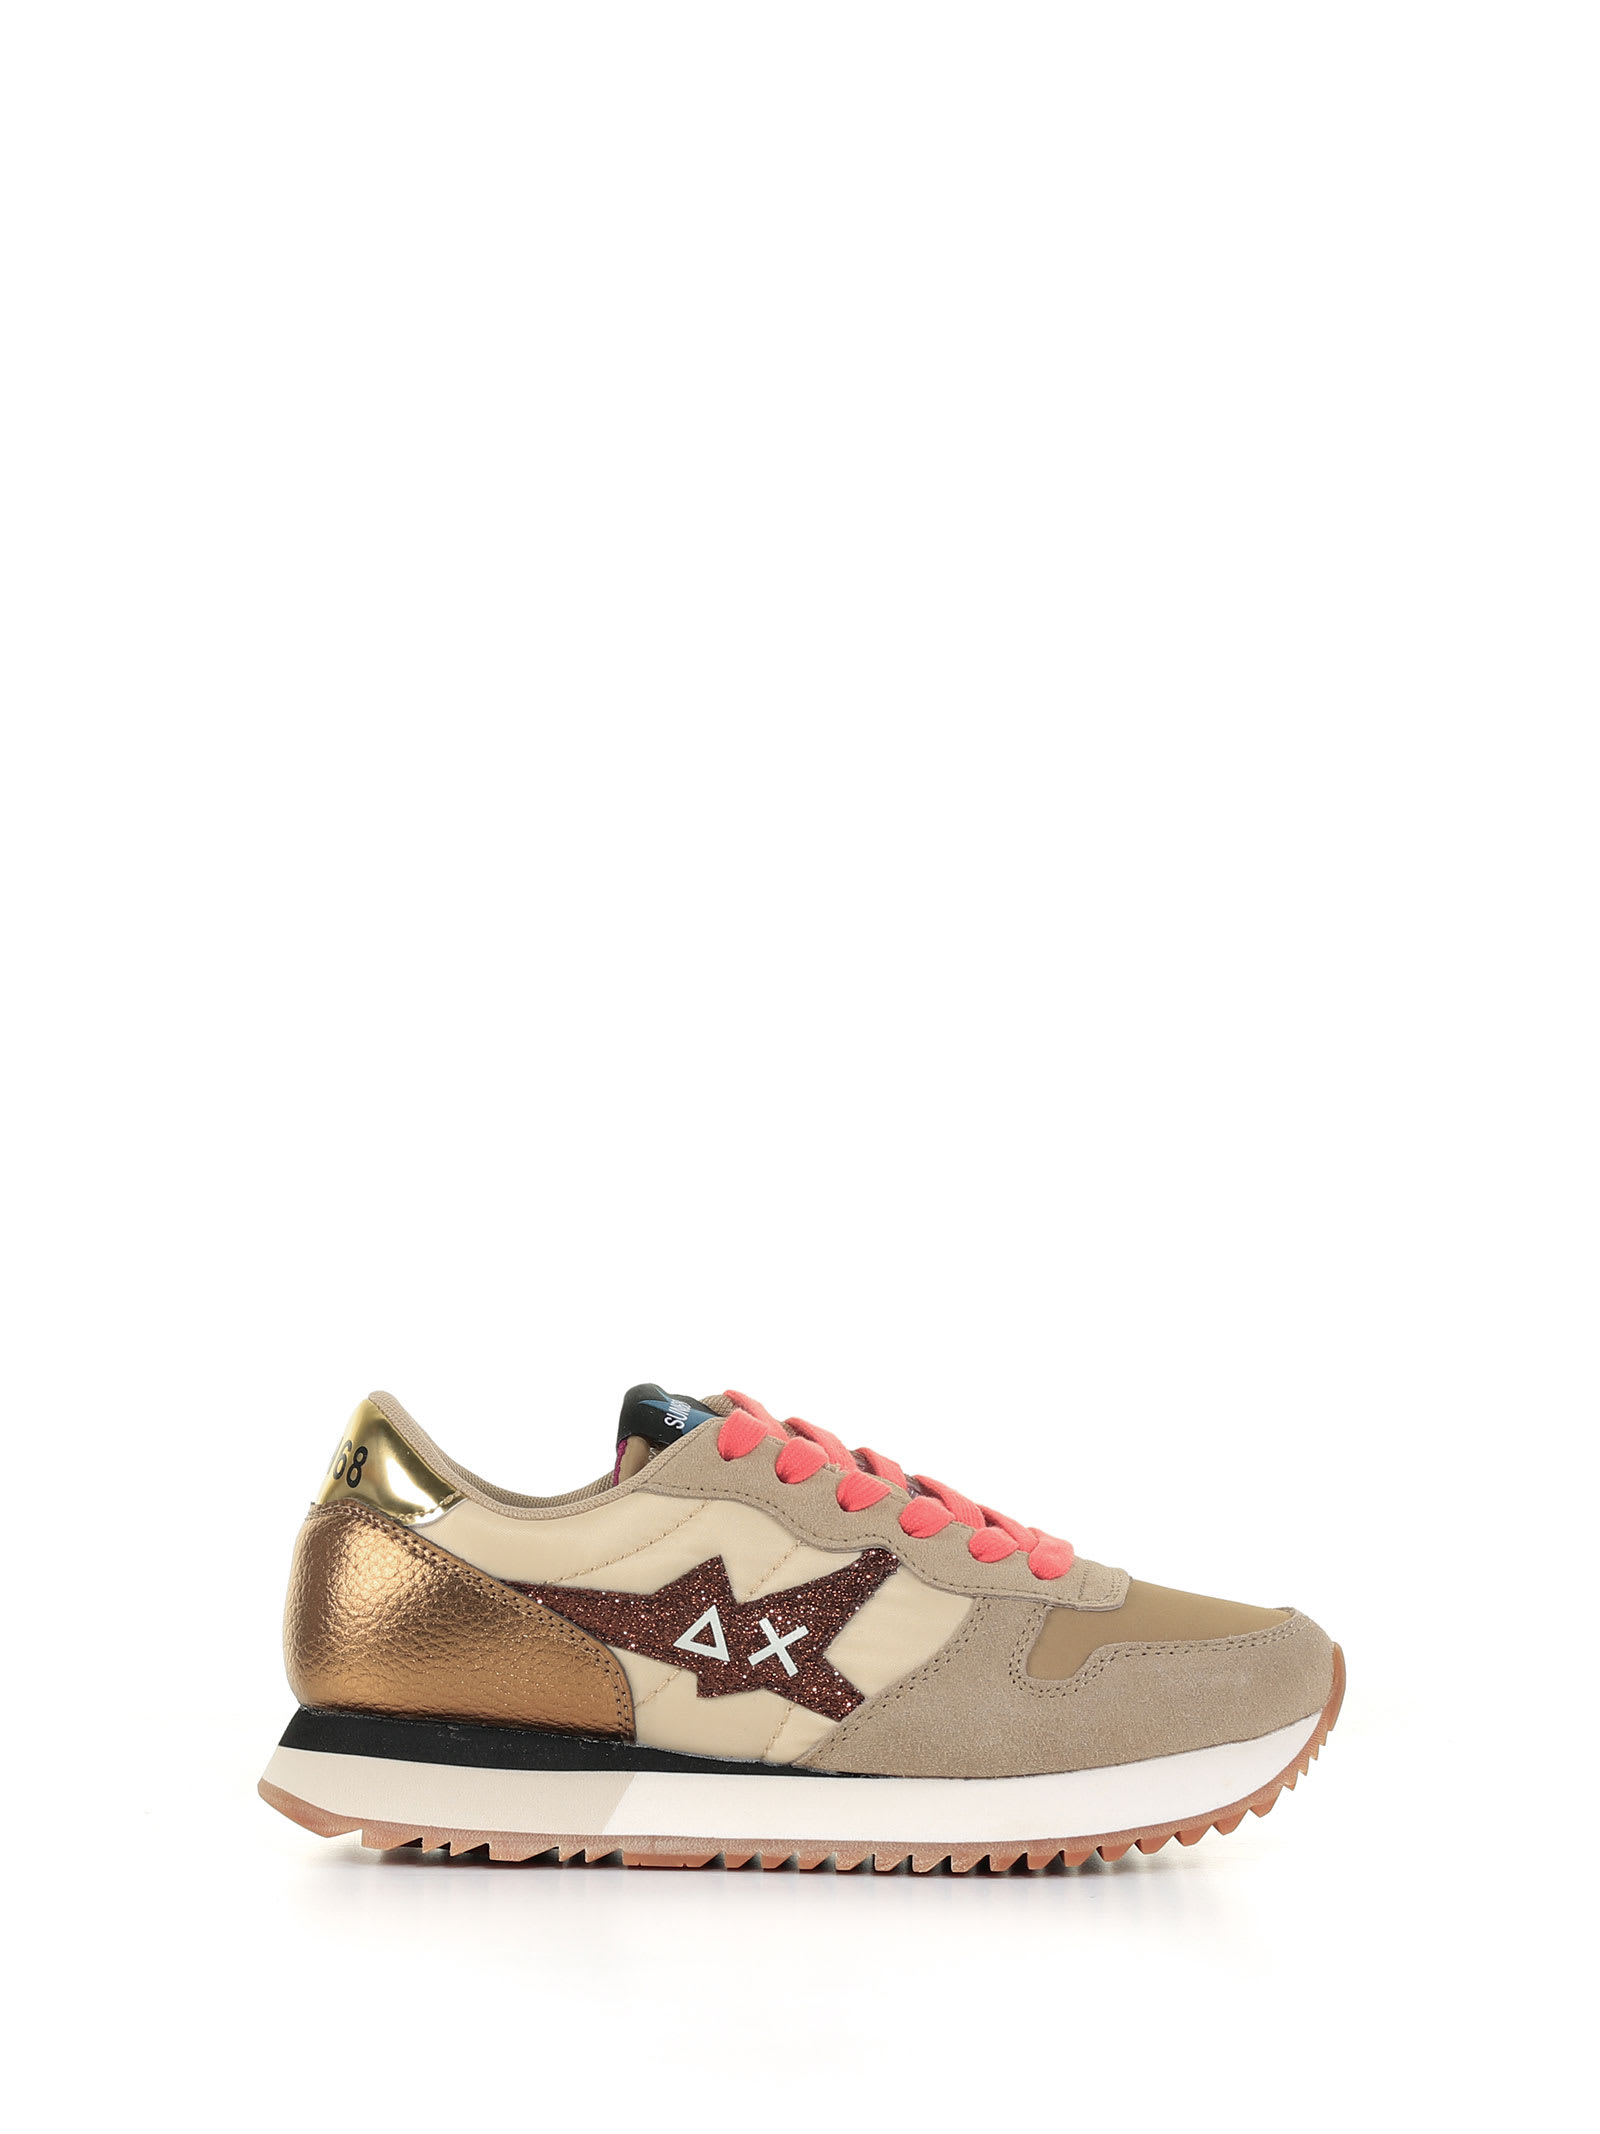 Sun 68 Star Girl Sneaker With Laminated Details